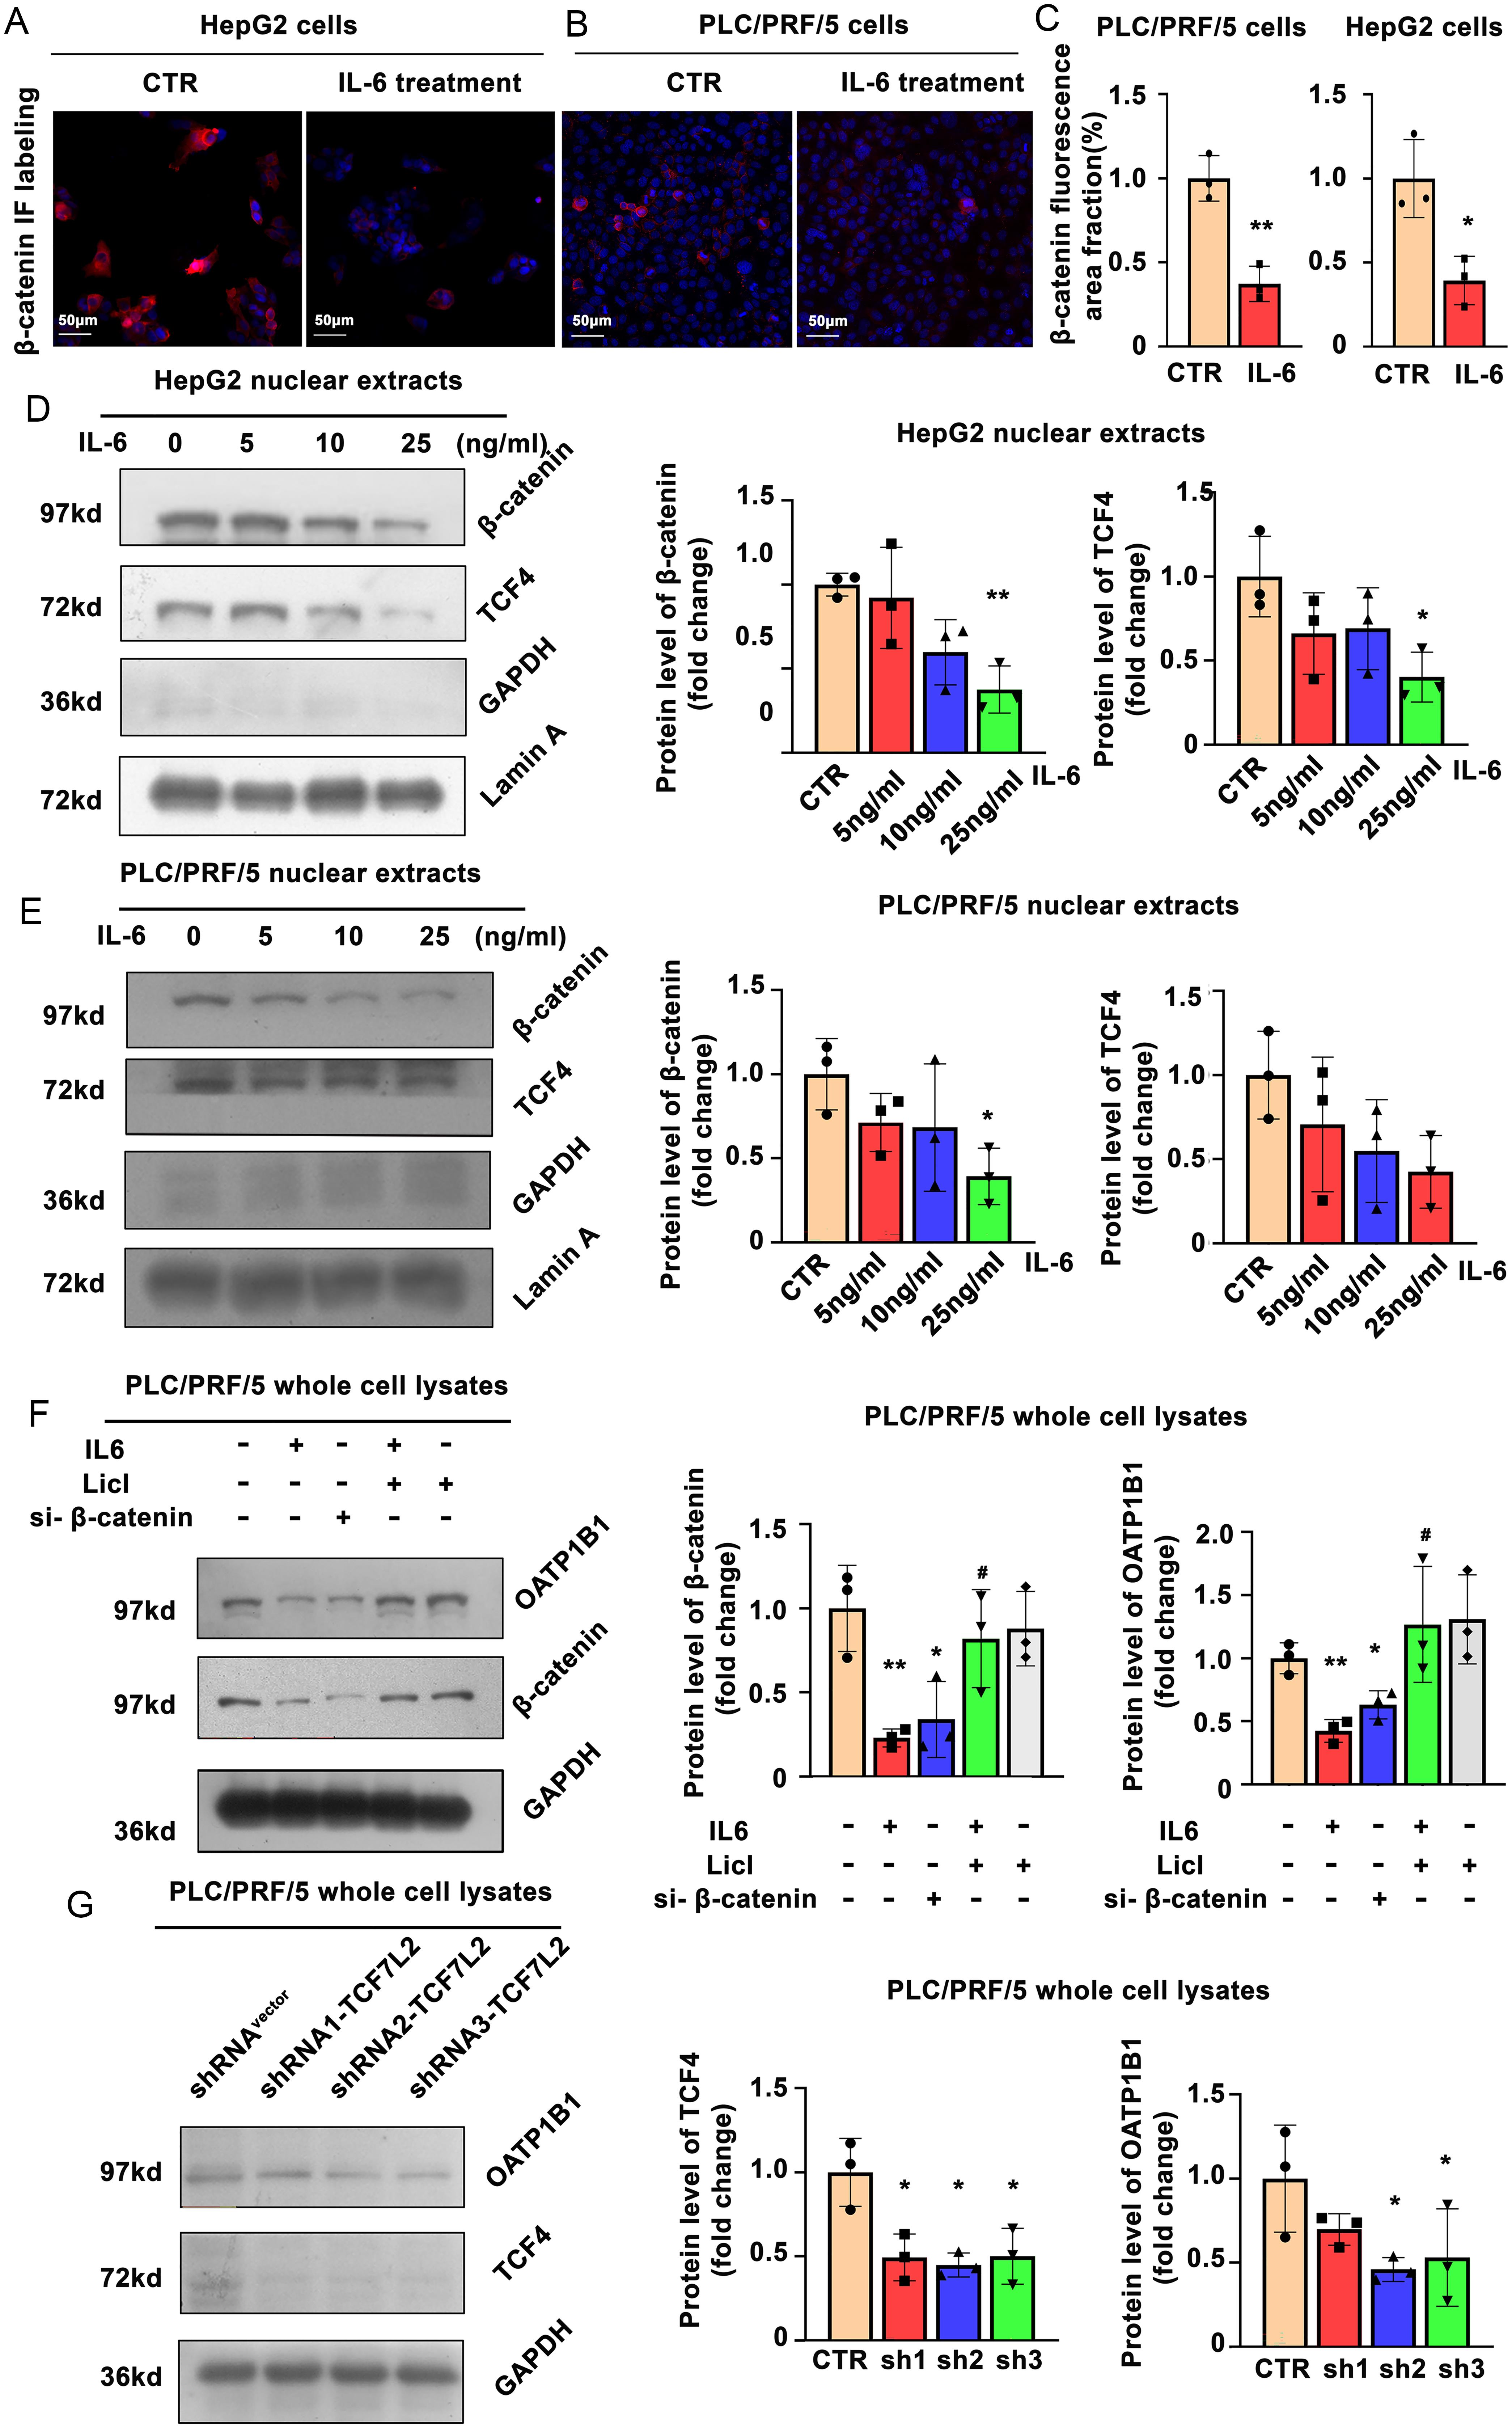 IL-6 attenuated OATP1B1 expression in PLC/PRF/5 and HepG2 with nuclear deletion of β-catenin.